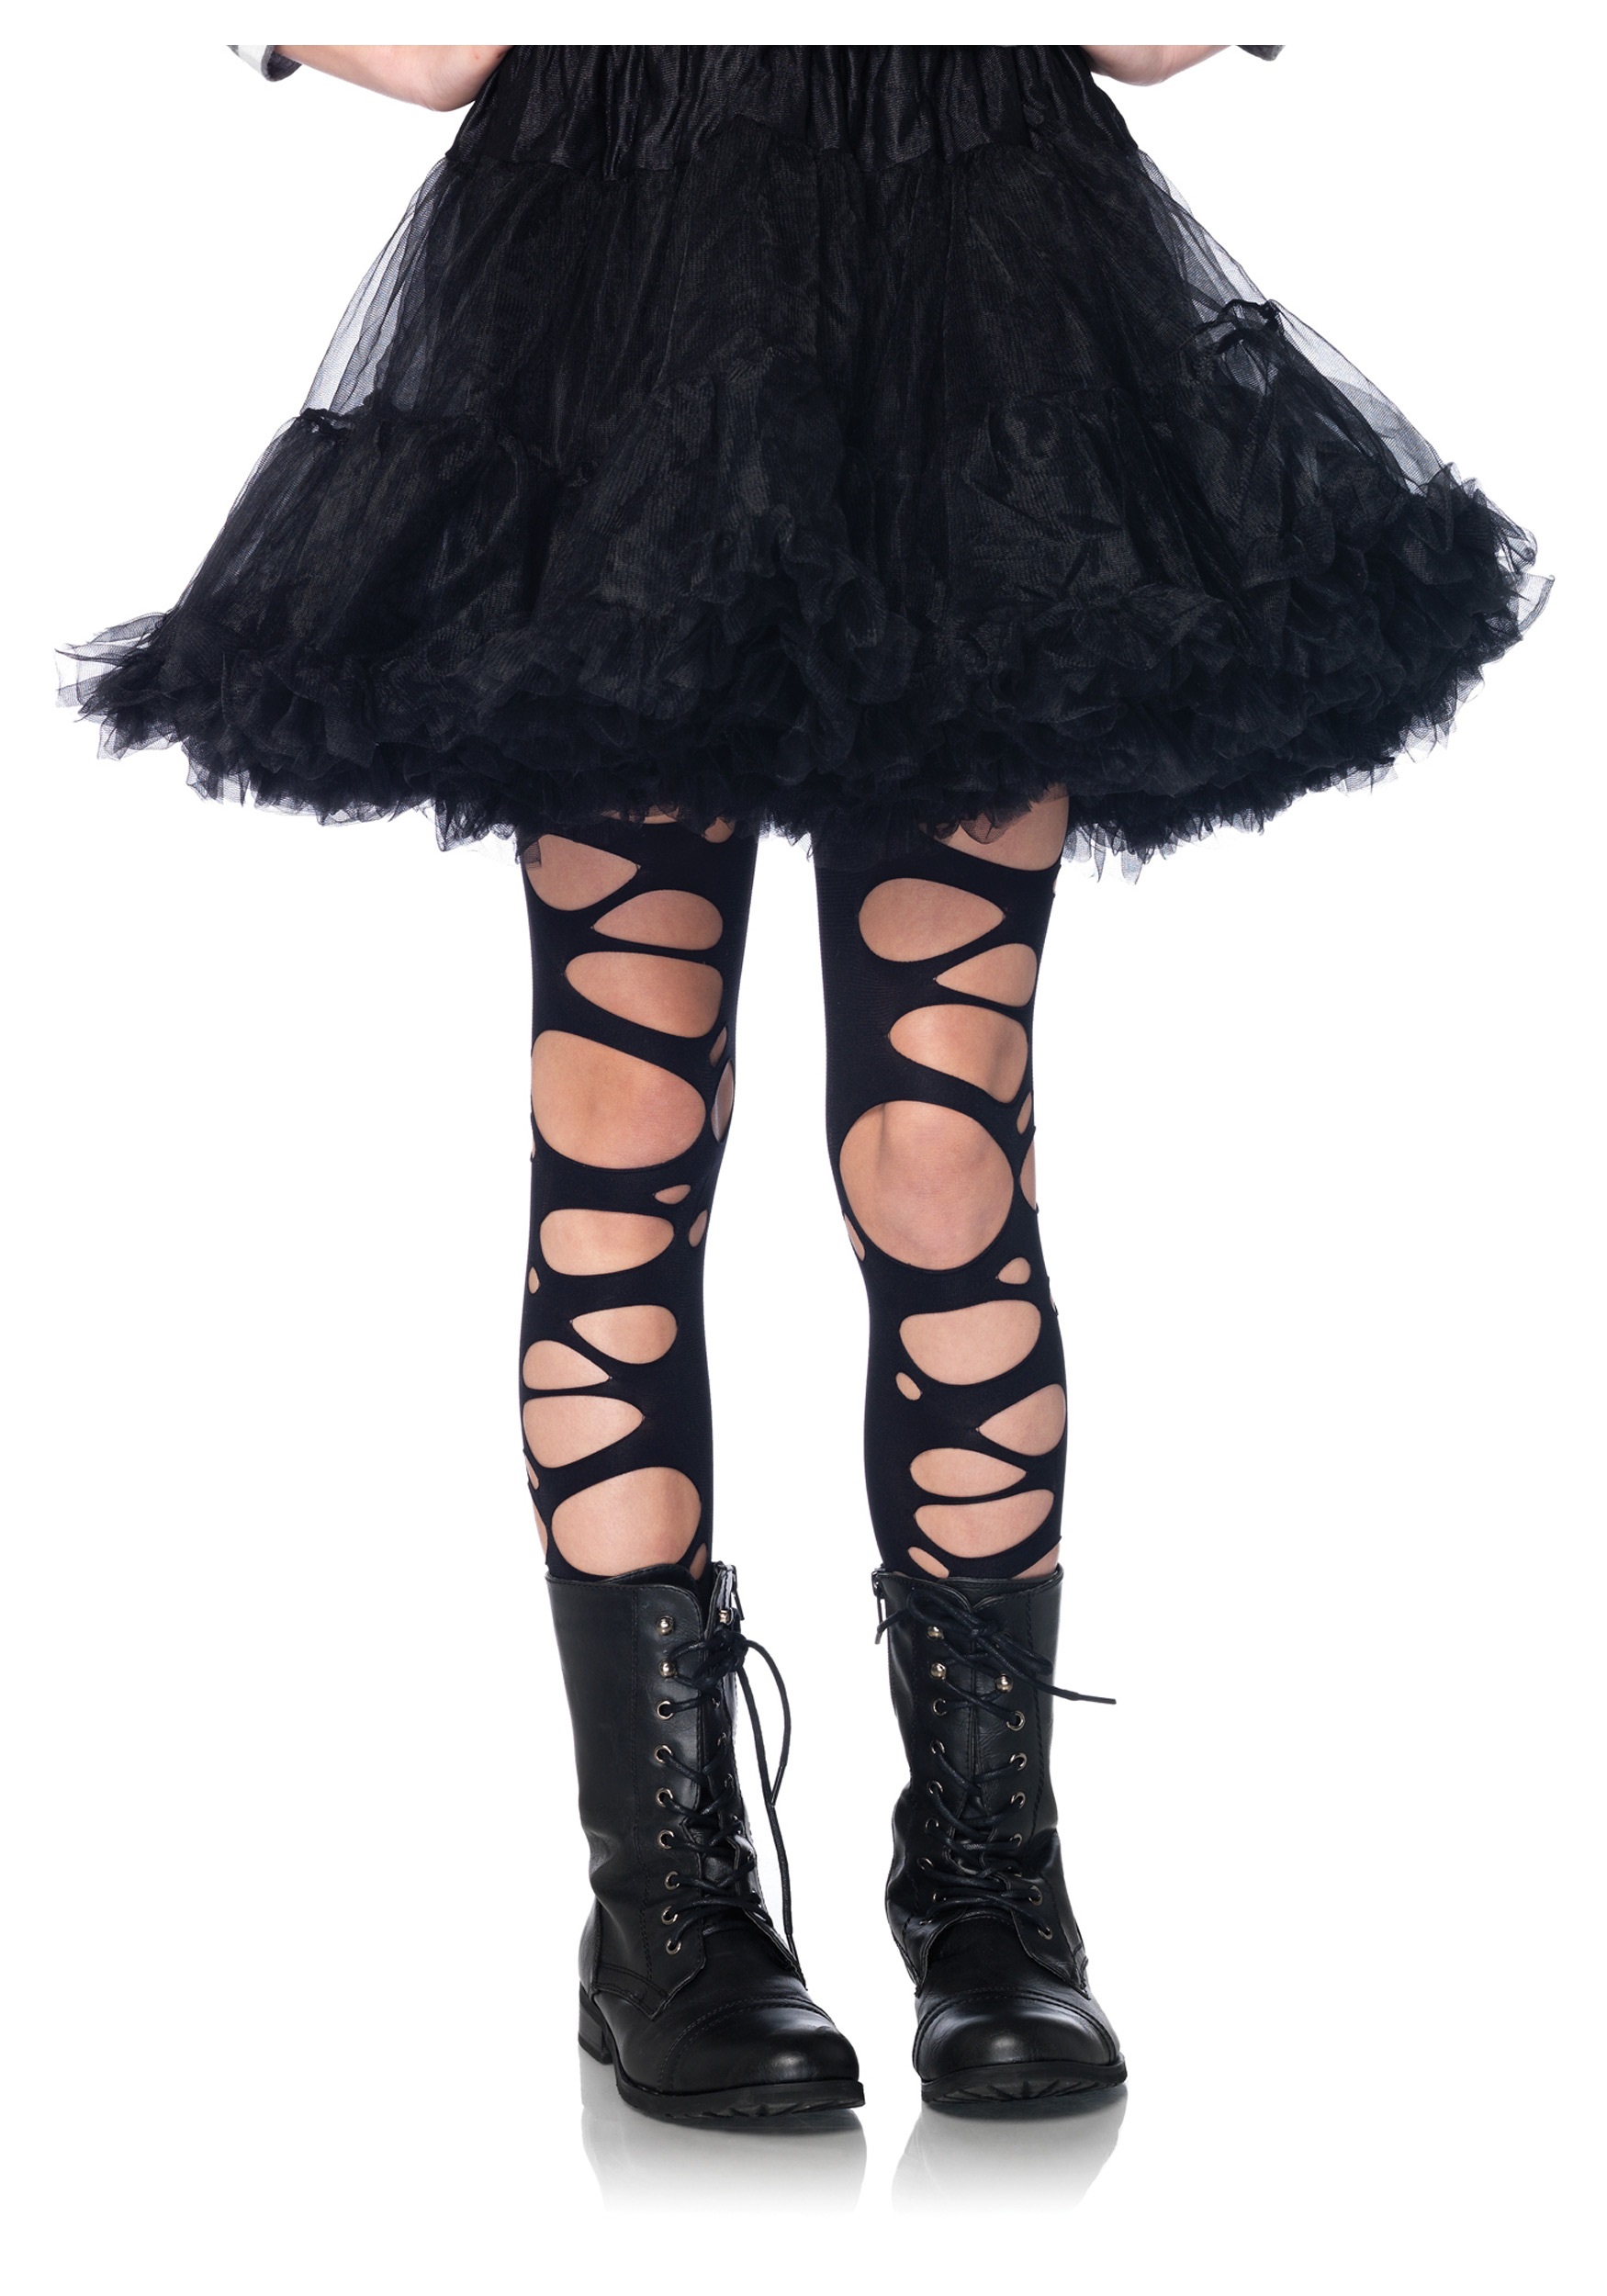 Girl's Tattered Gothic Tights